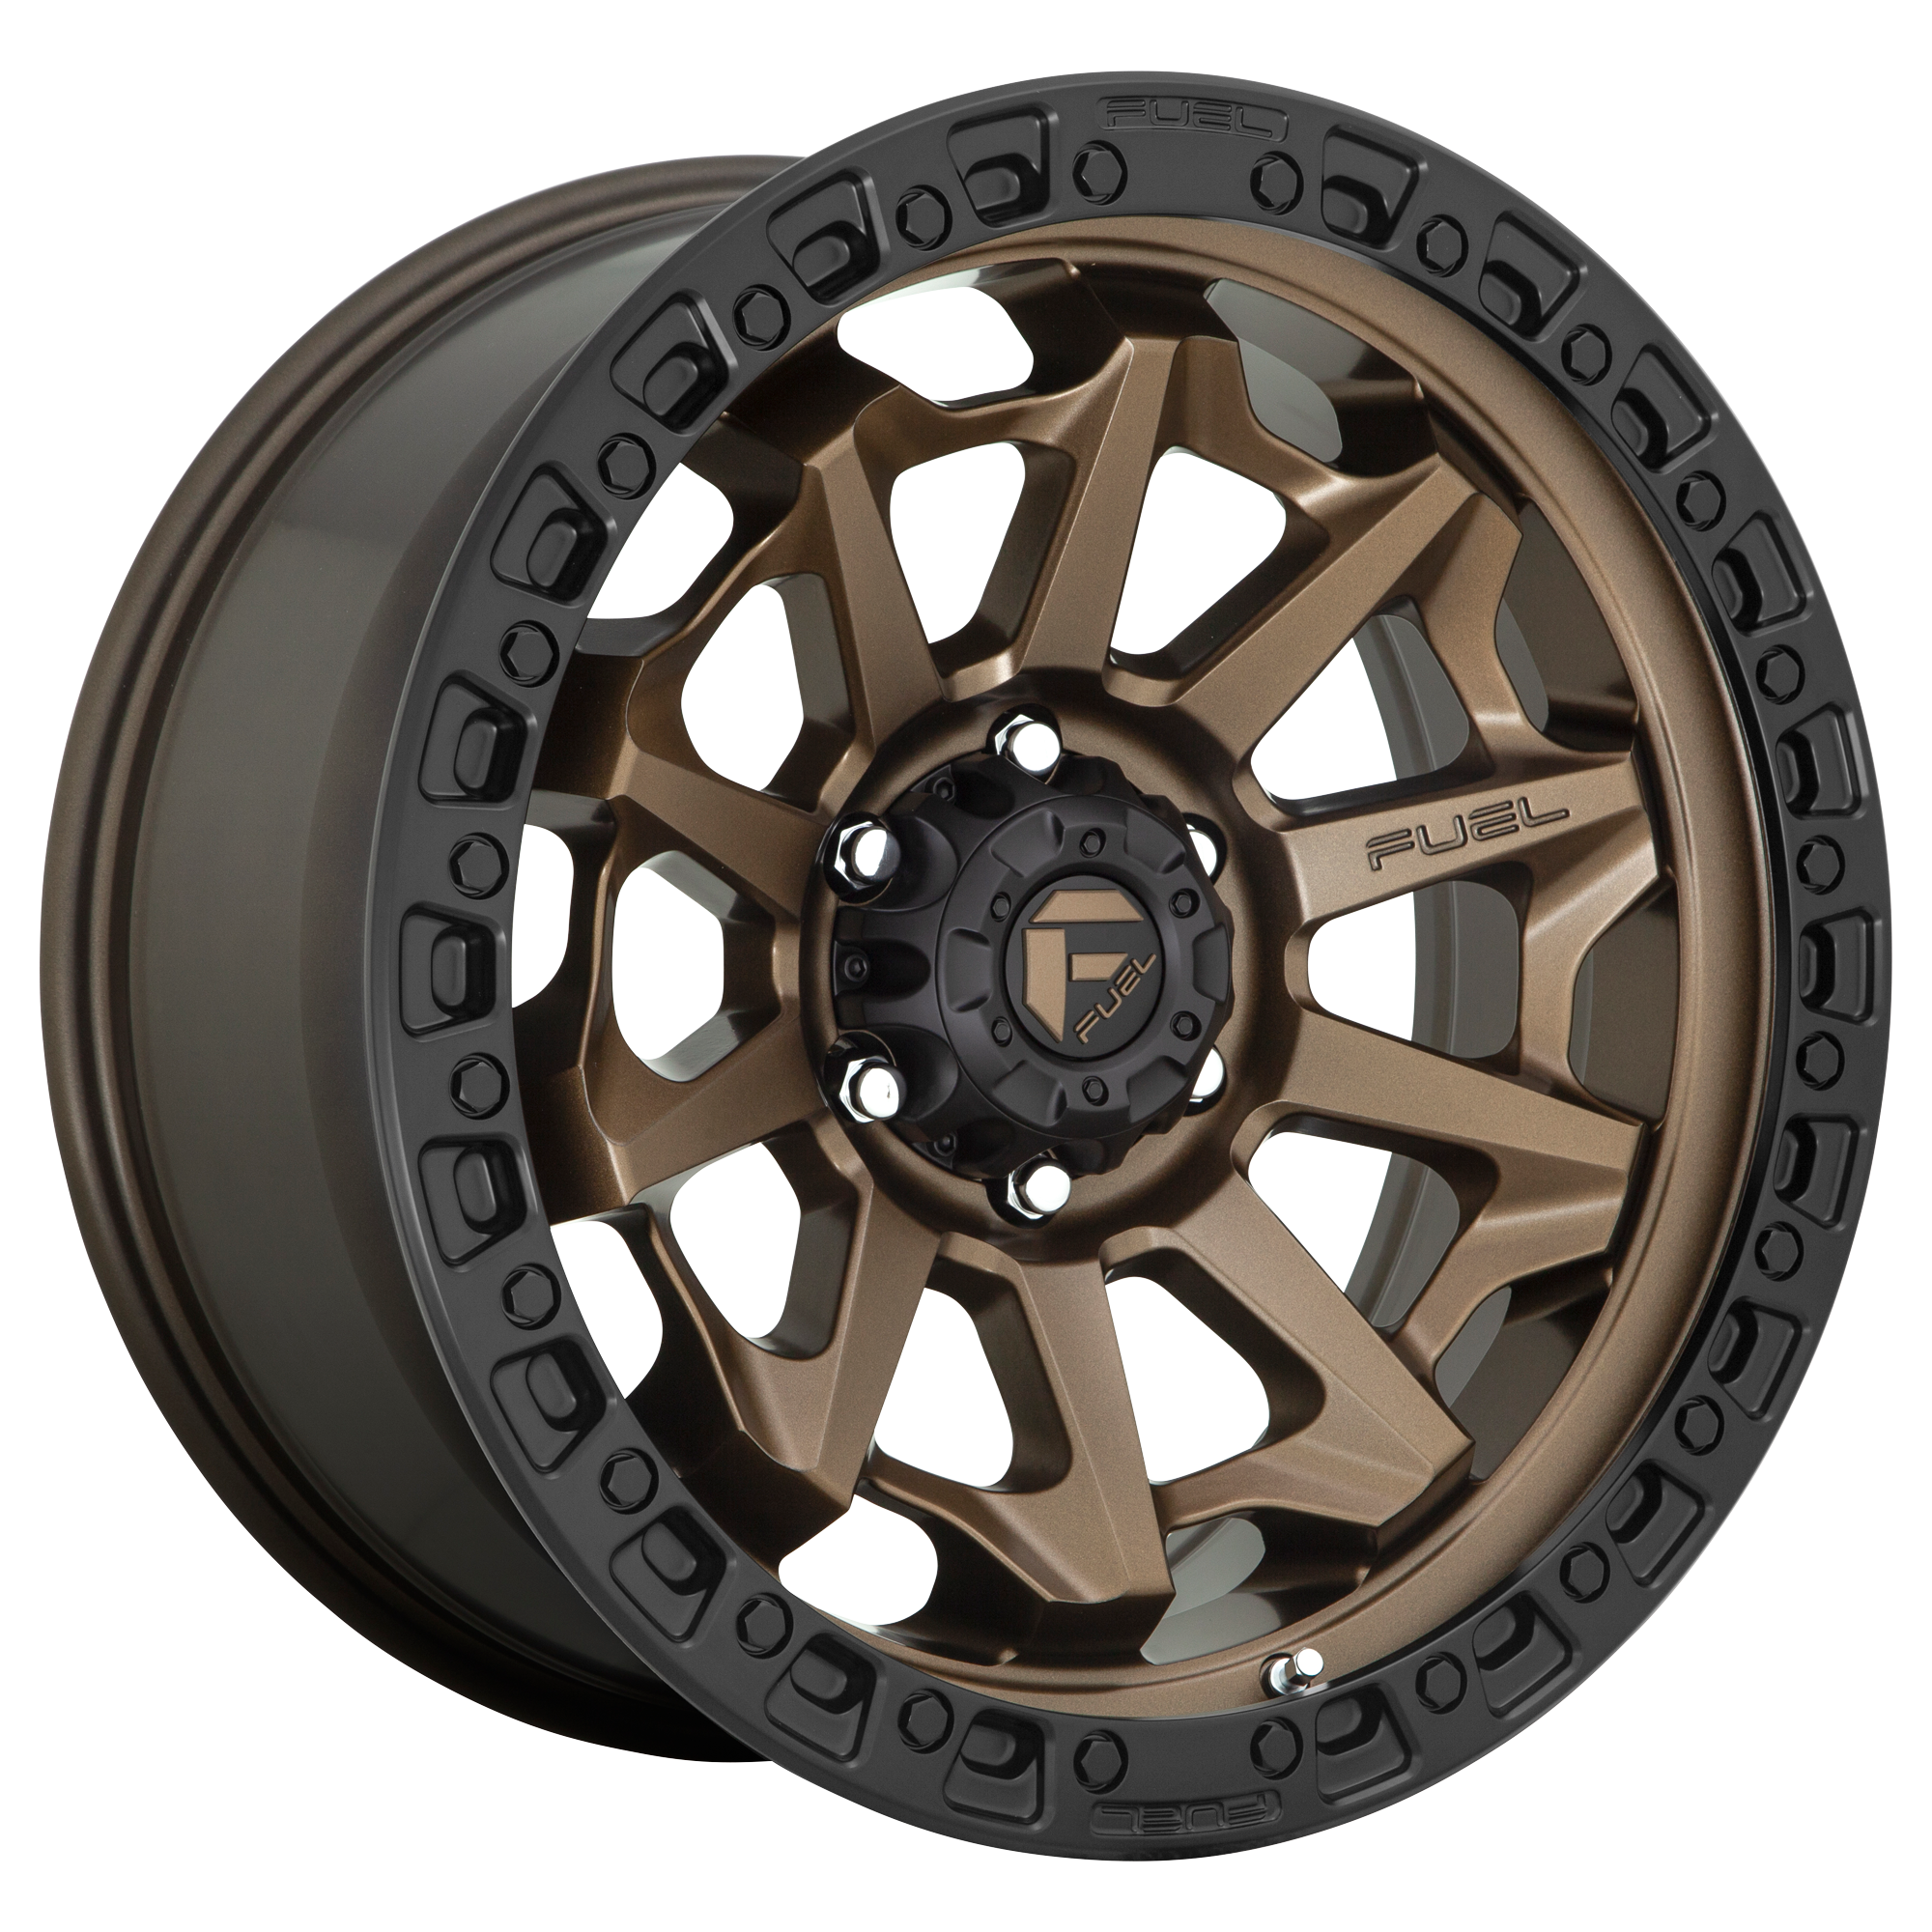 COVERT 20x10 5x127.00 MATTE BRONZE BLACK BEAD RING (-18 mm) - Tires and Engine Performance